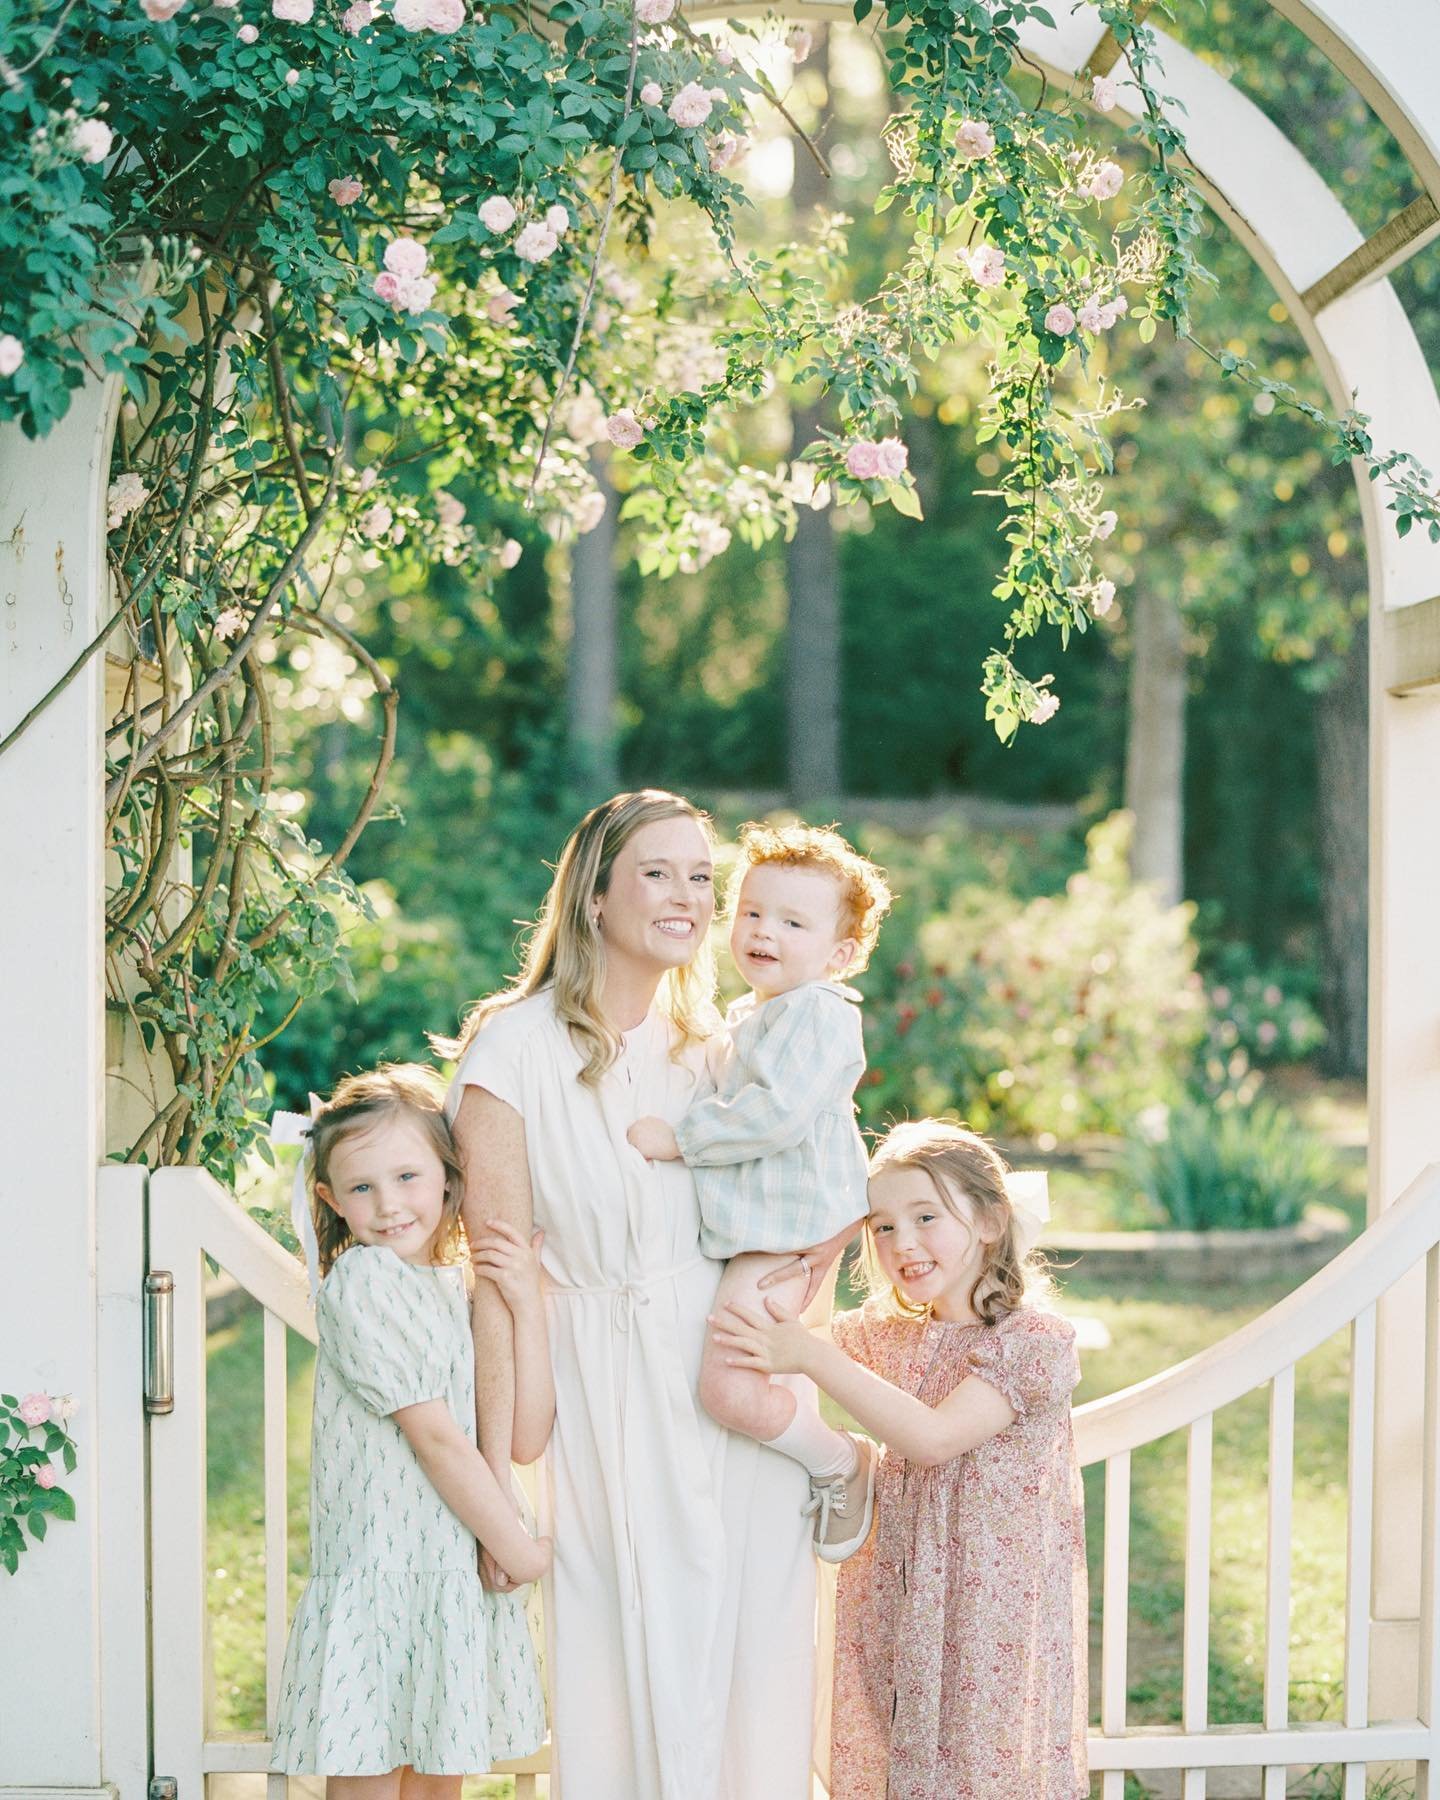 The Church Family looking so stinking cute! It was really hard to narrow down my favorites from this family session!✨